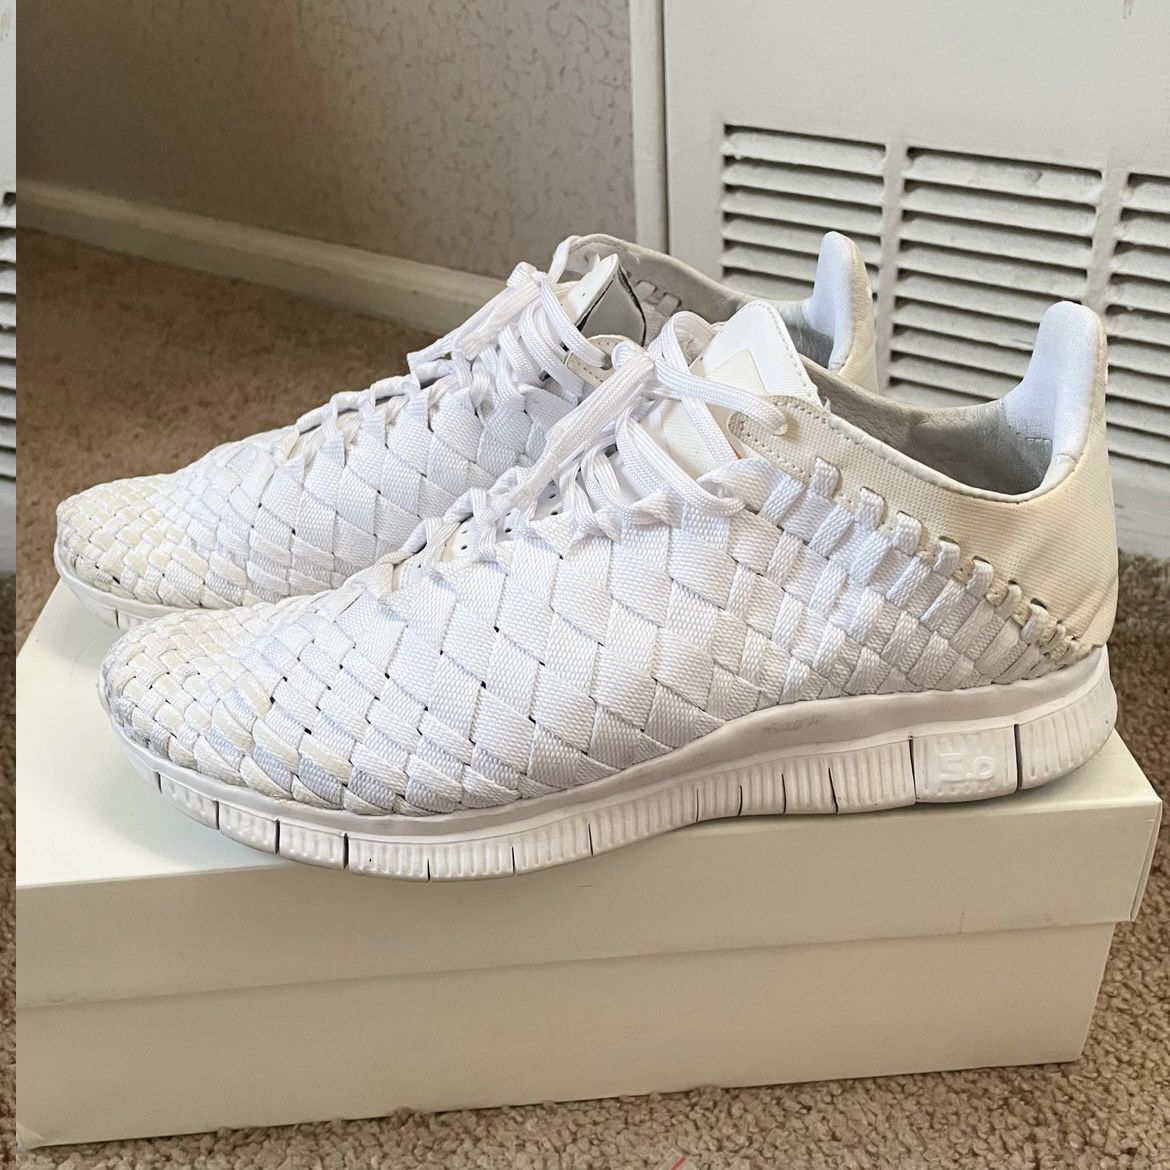 8 NIKE Free Inneva Woven SP shoes for Sale in Rockville Centre, NY -